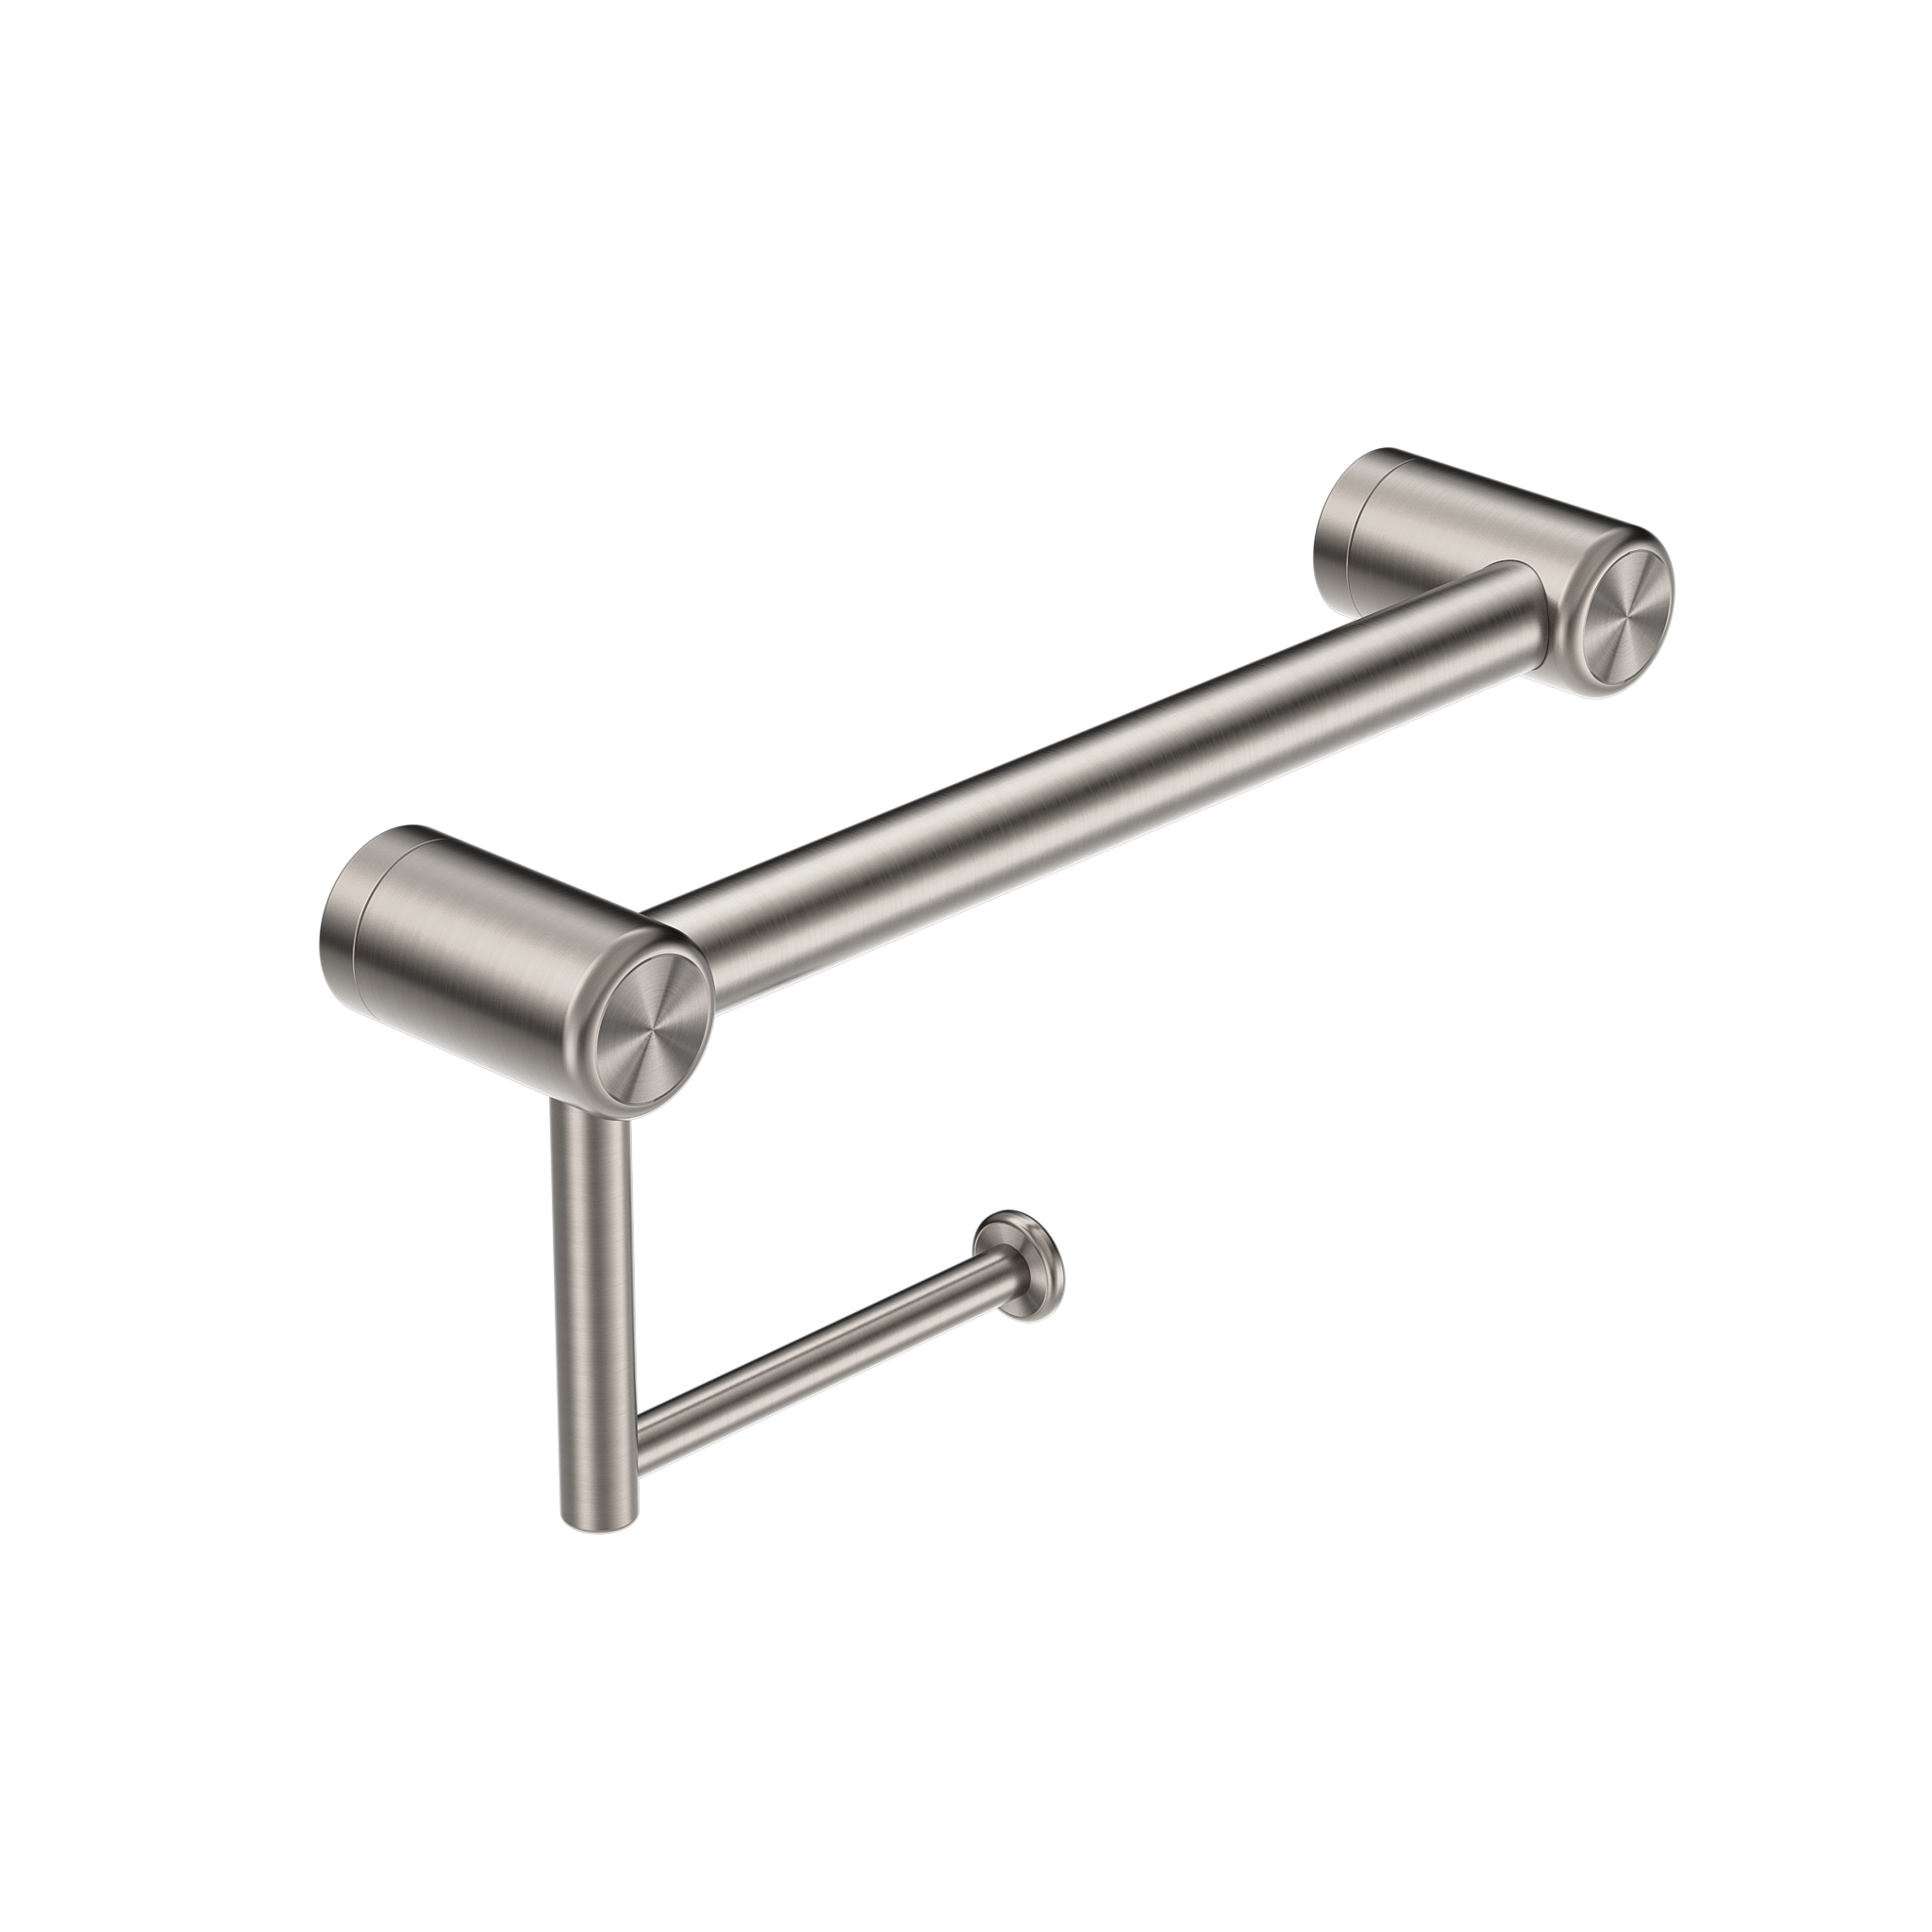 Calibre Mecca 25mm Toilet Roll Rail 300mm Brushed Nickel - NRCR2512ABN